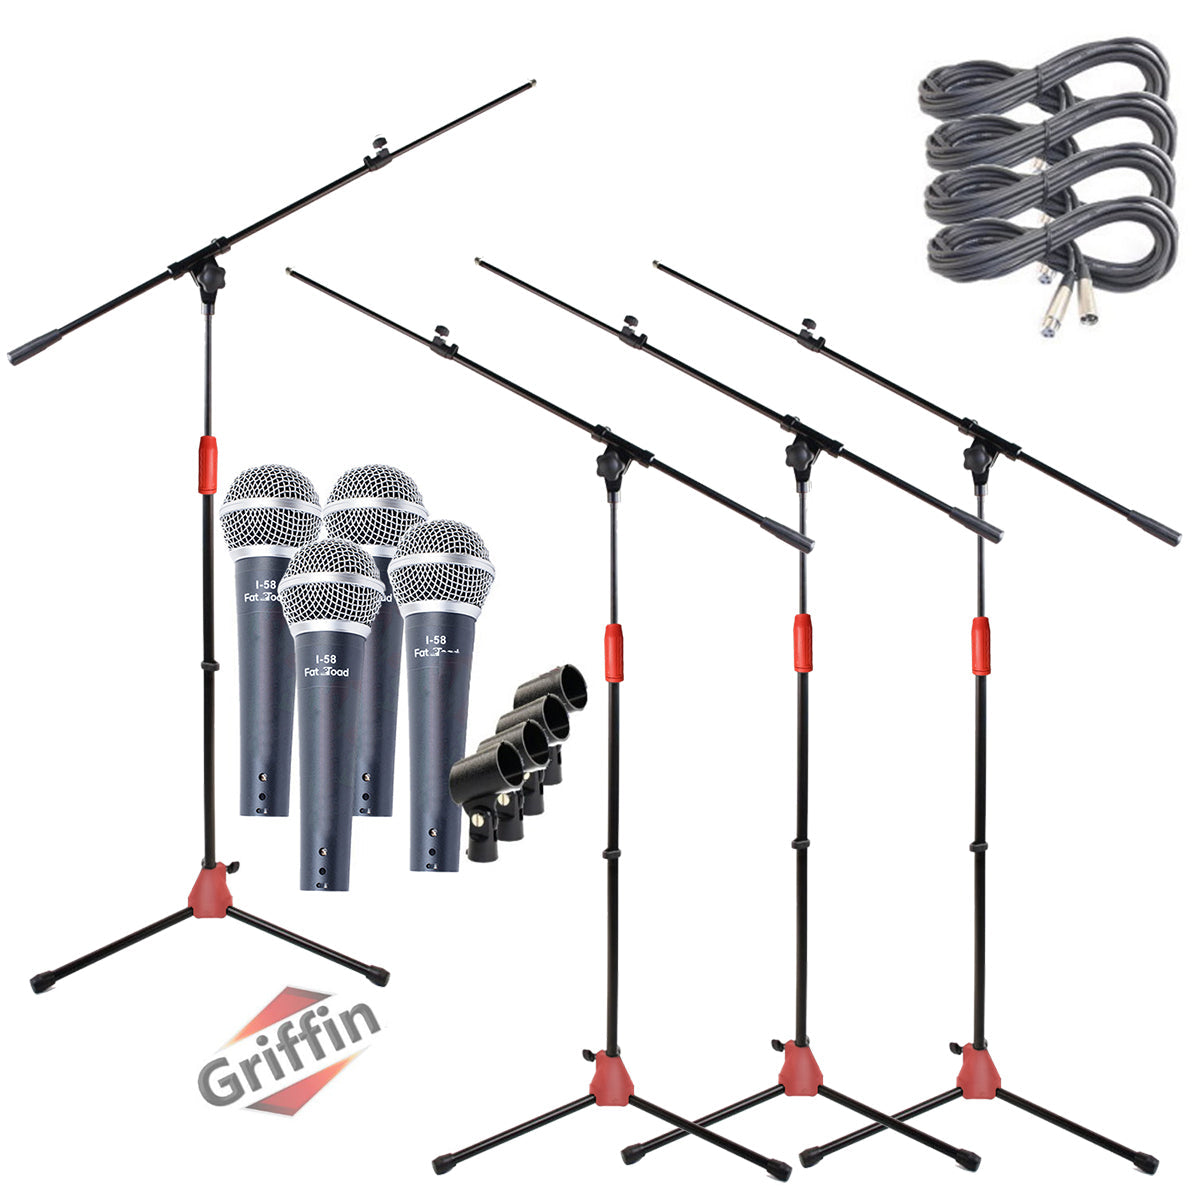 Microphone Stand with Boom Arm, Handheld Mics, 20 Ft XLR Cable (Pack of 4) by GRIFFIN